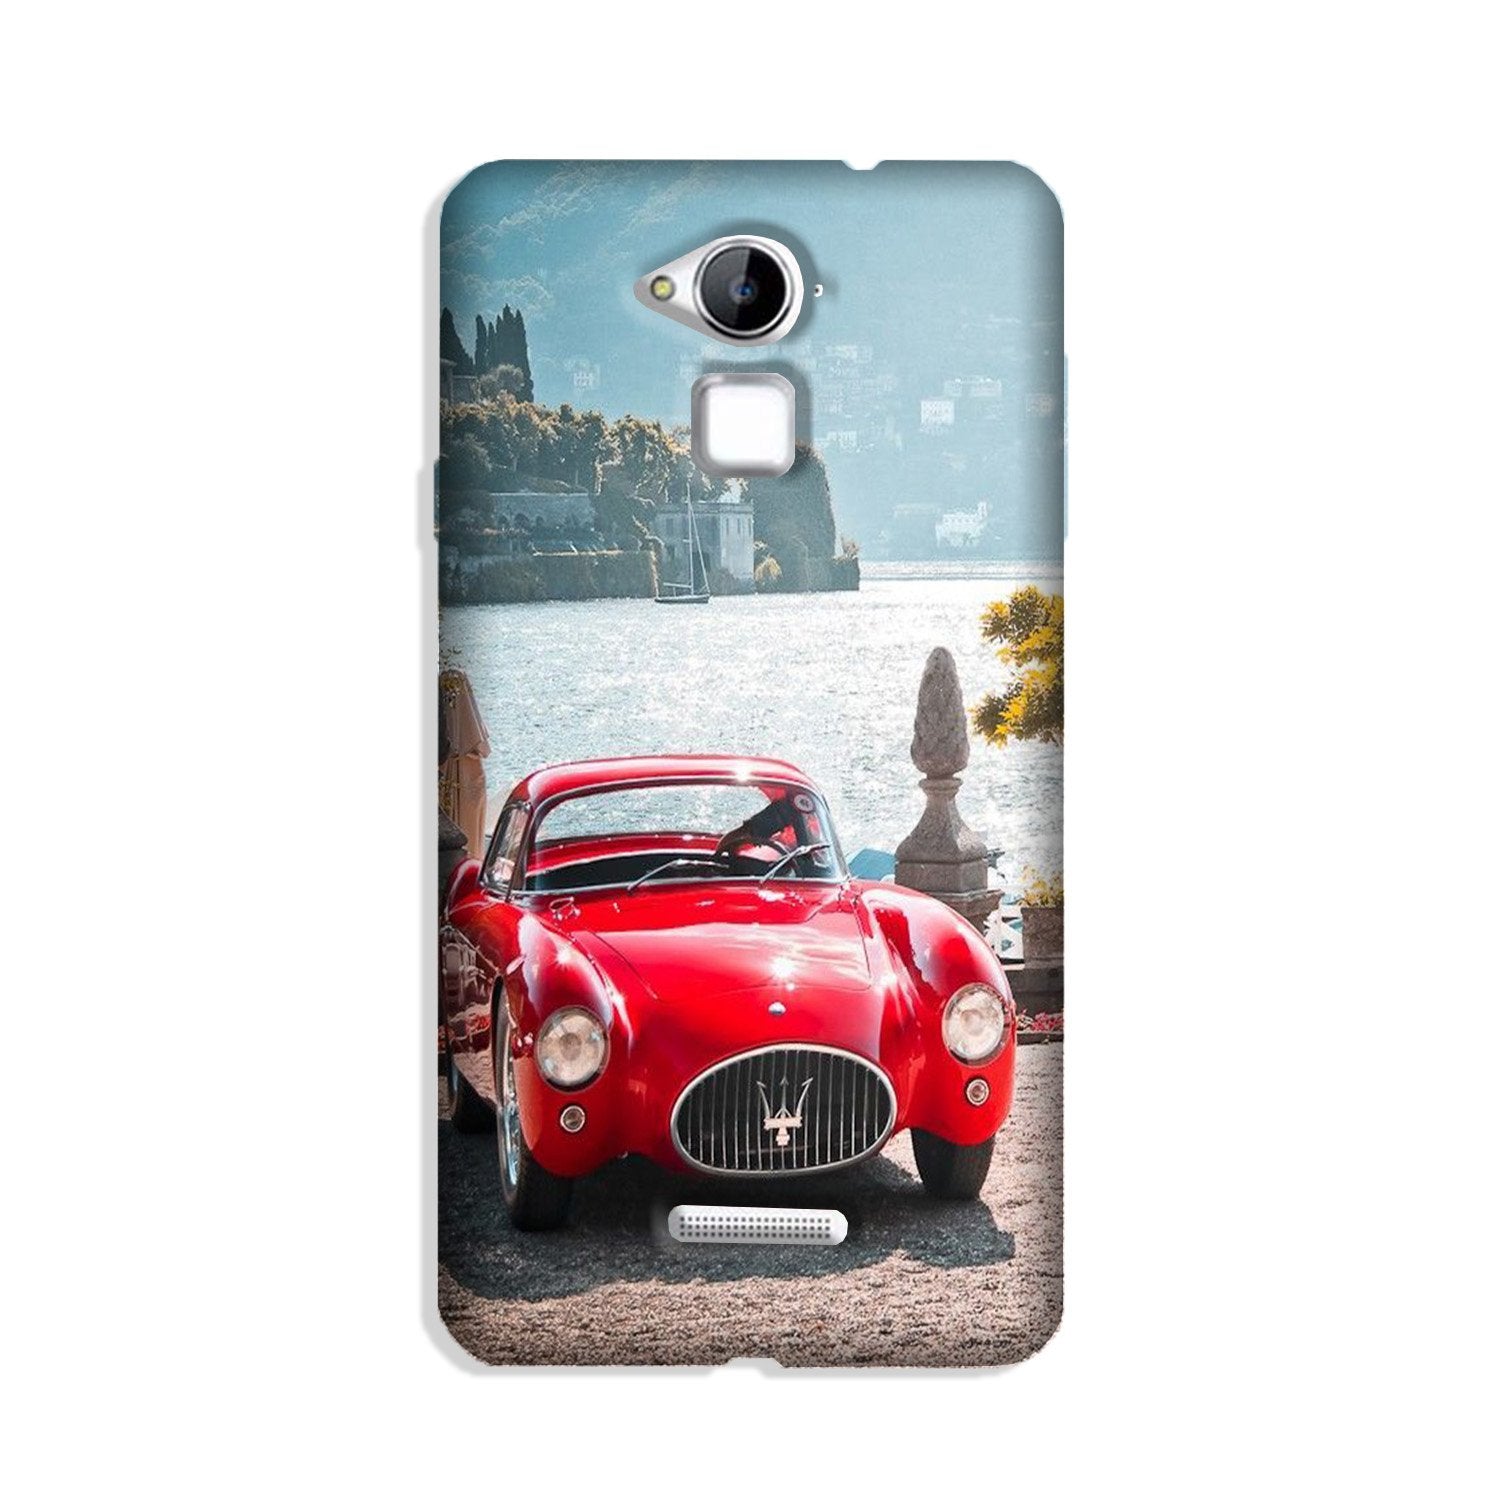 Vintage Car Case for Coolpad Note 3